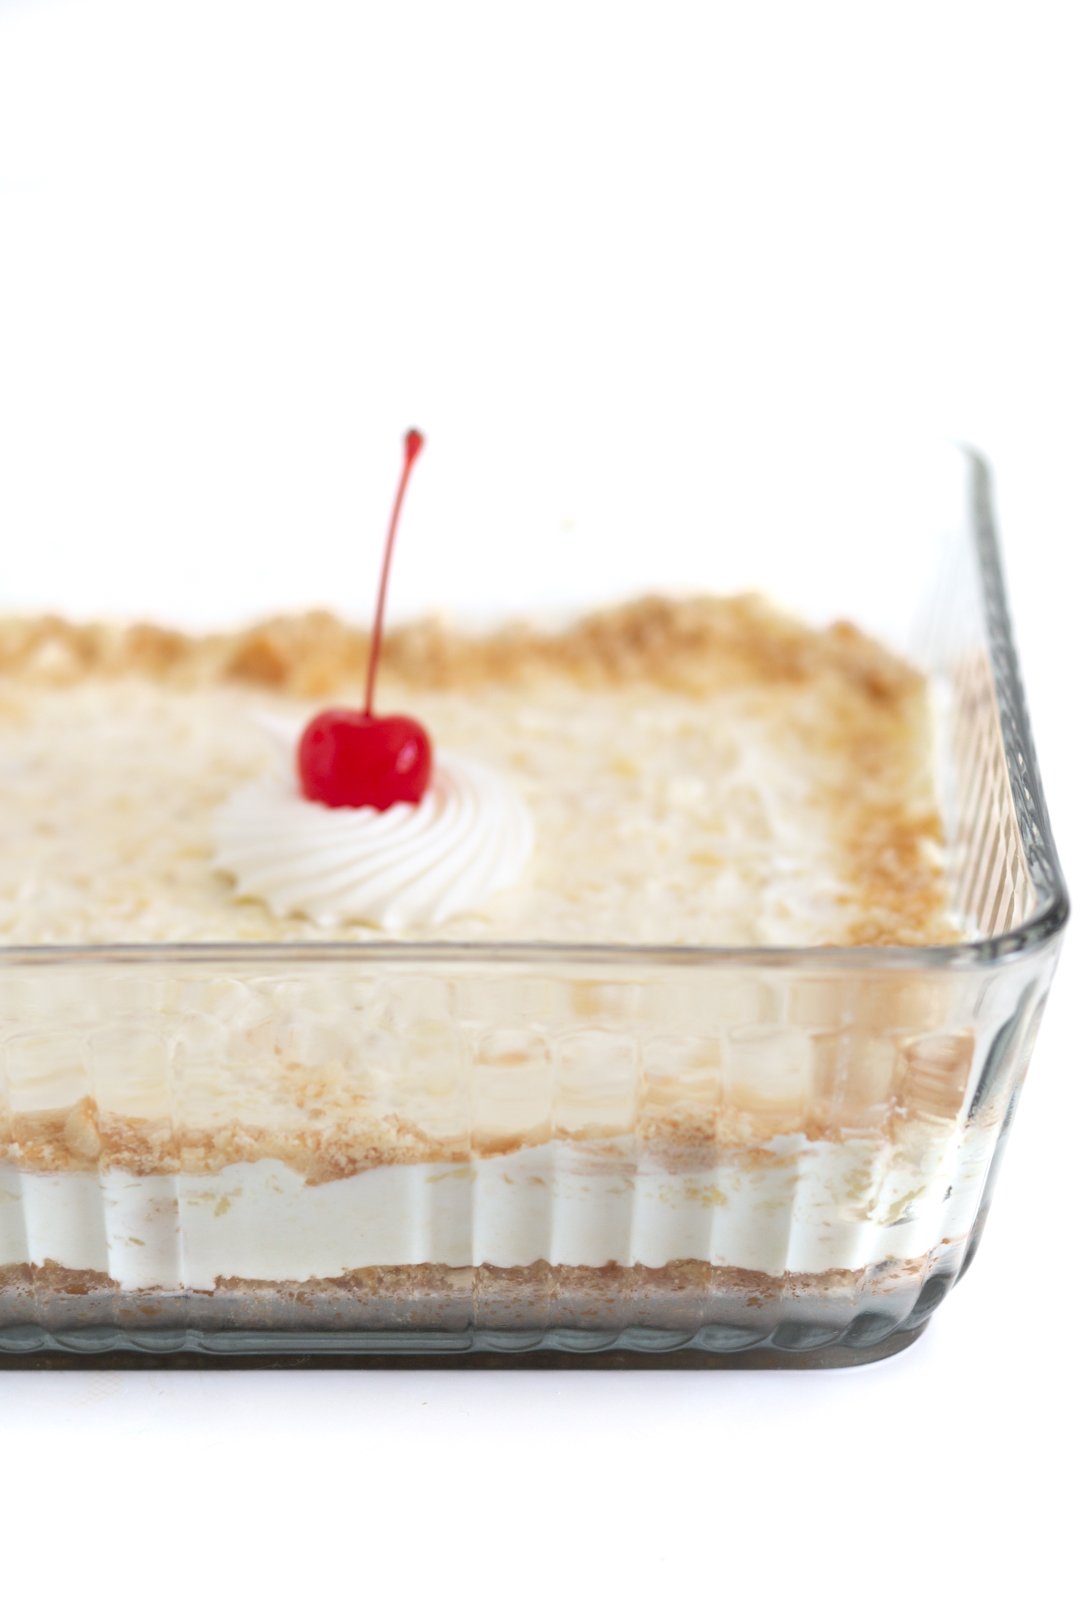 layered pineapple dessert in a glass baking dish. topped with pretty dollop of whipped cream and a cherry